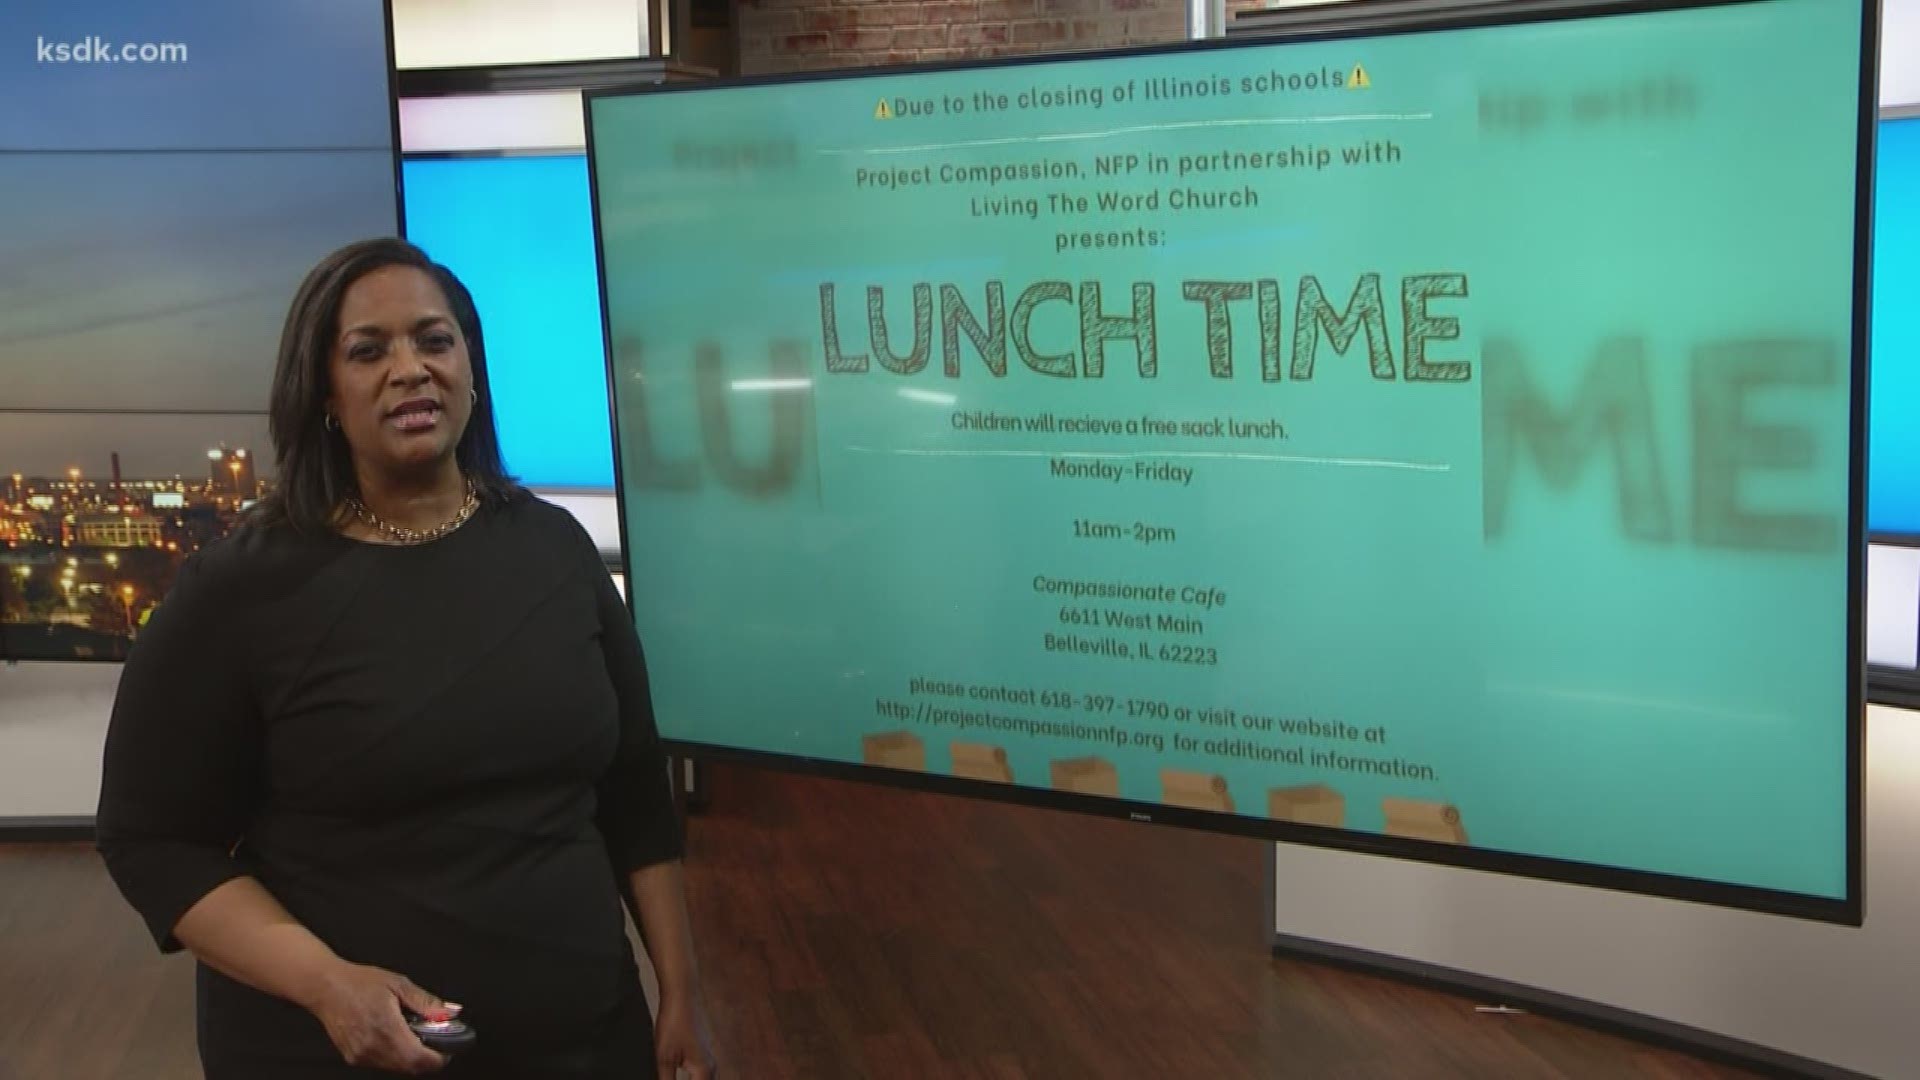 Restaurants and non-profits are working to provide meals for kids